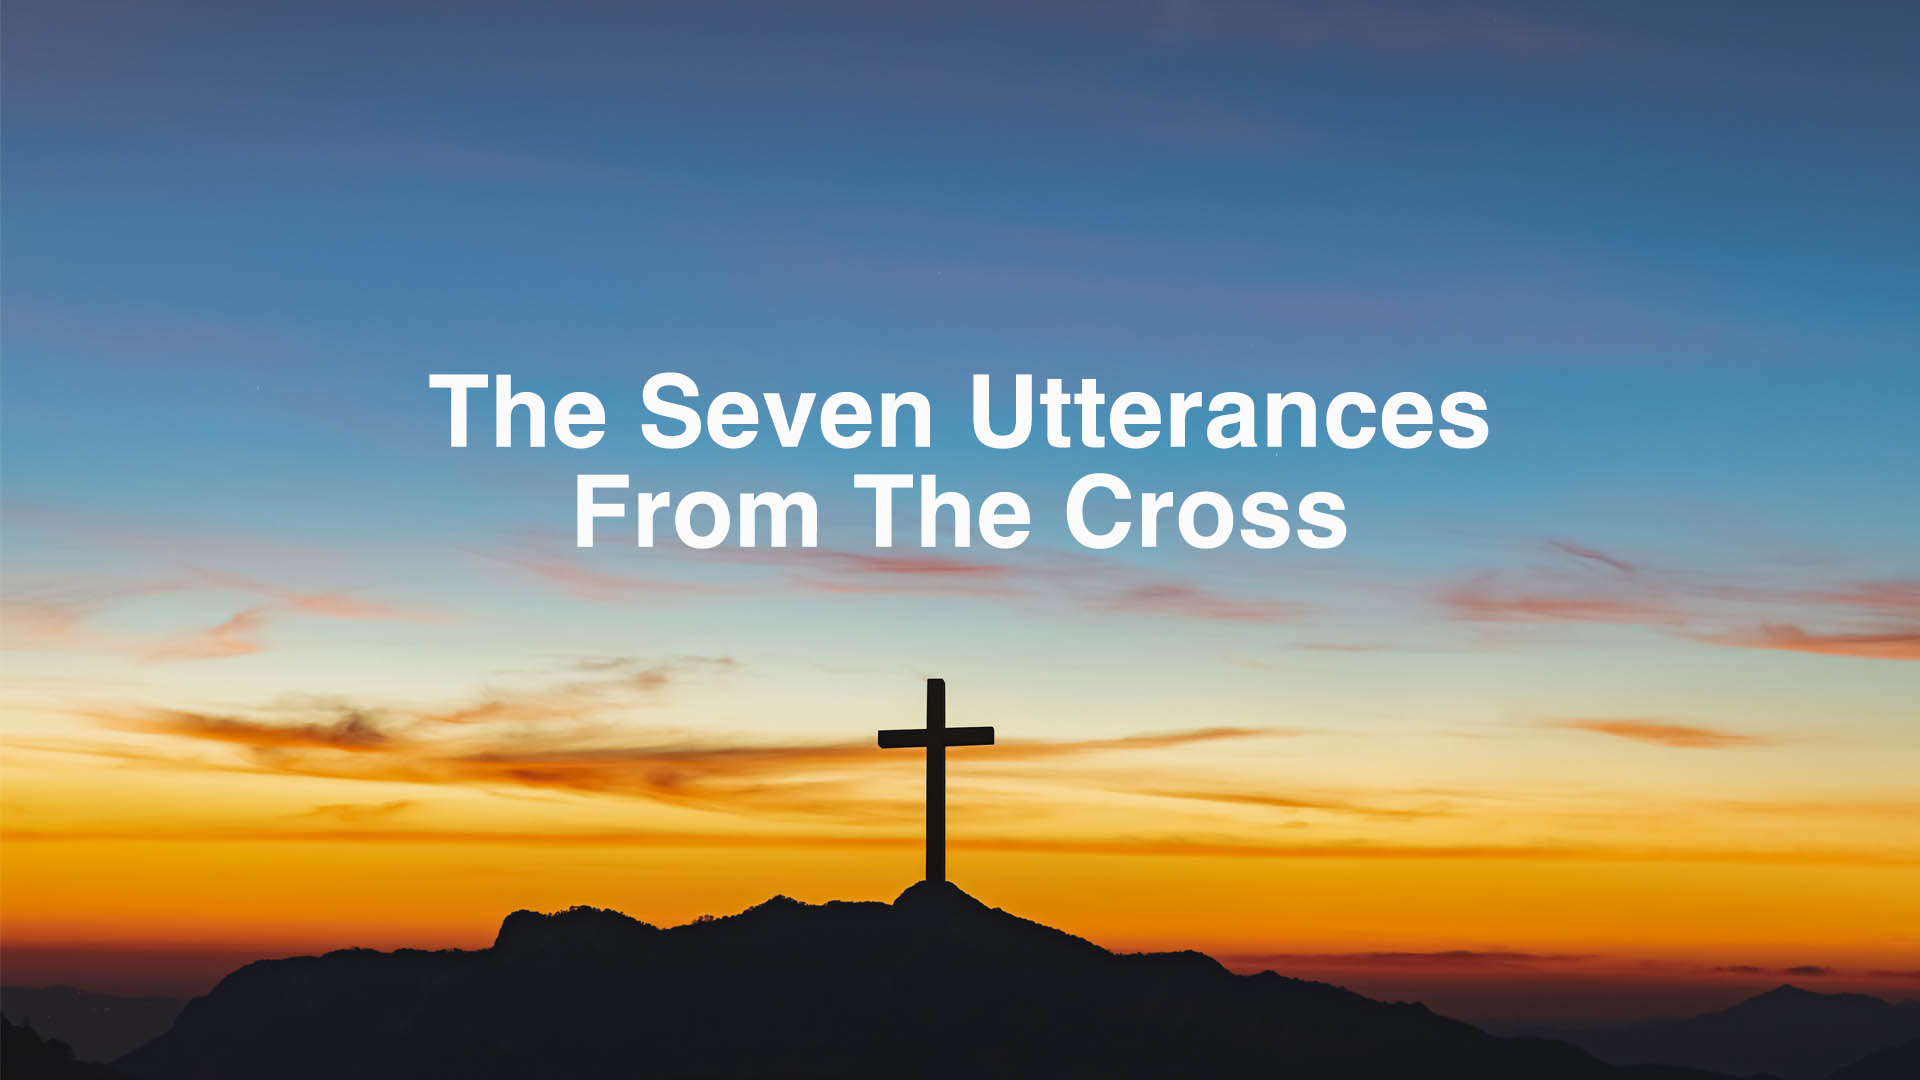 The Seven Utterances from the Cross